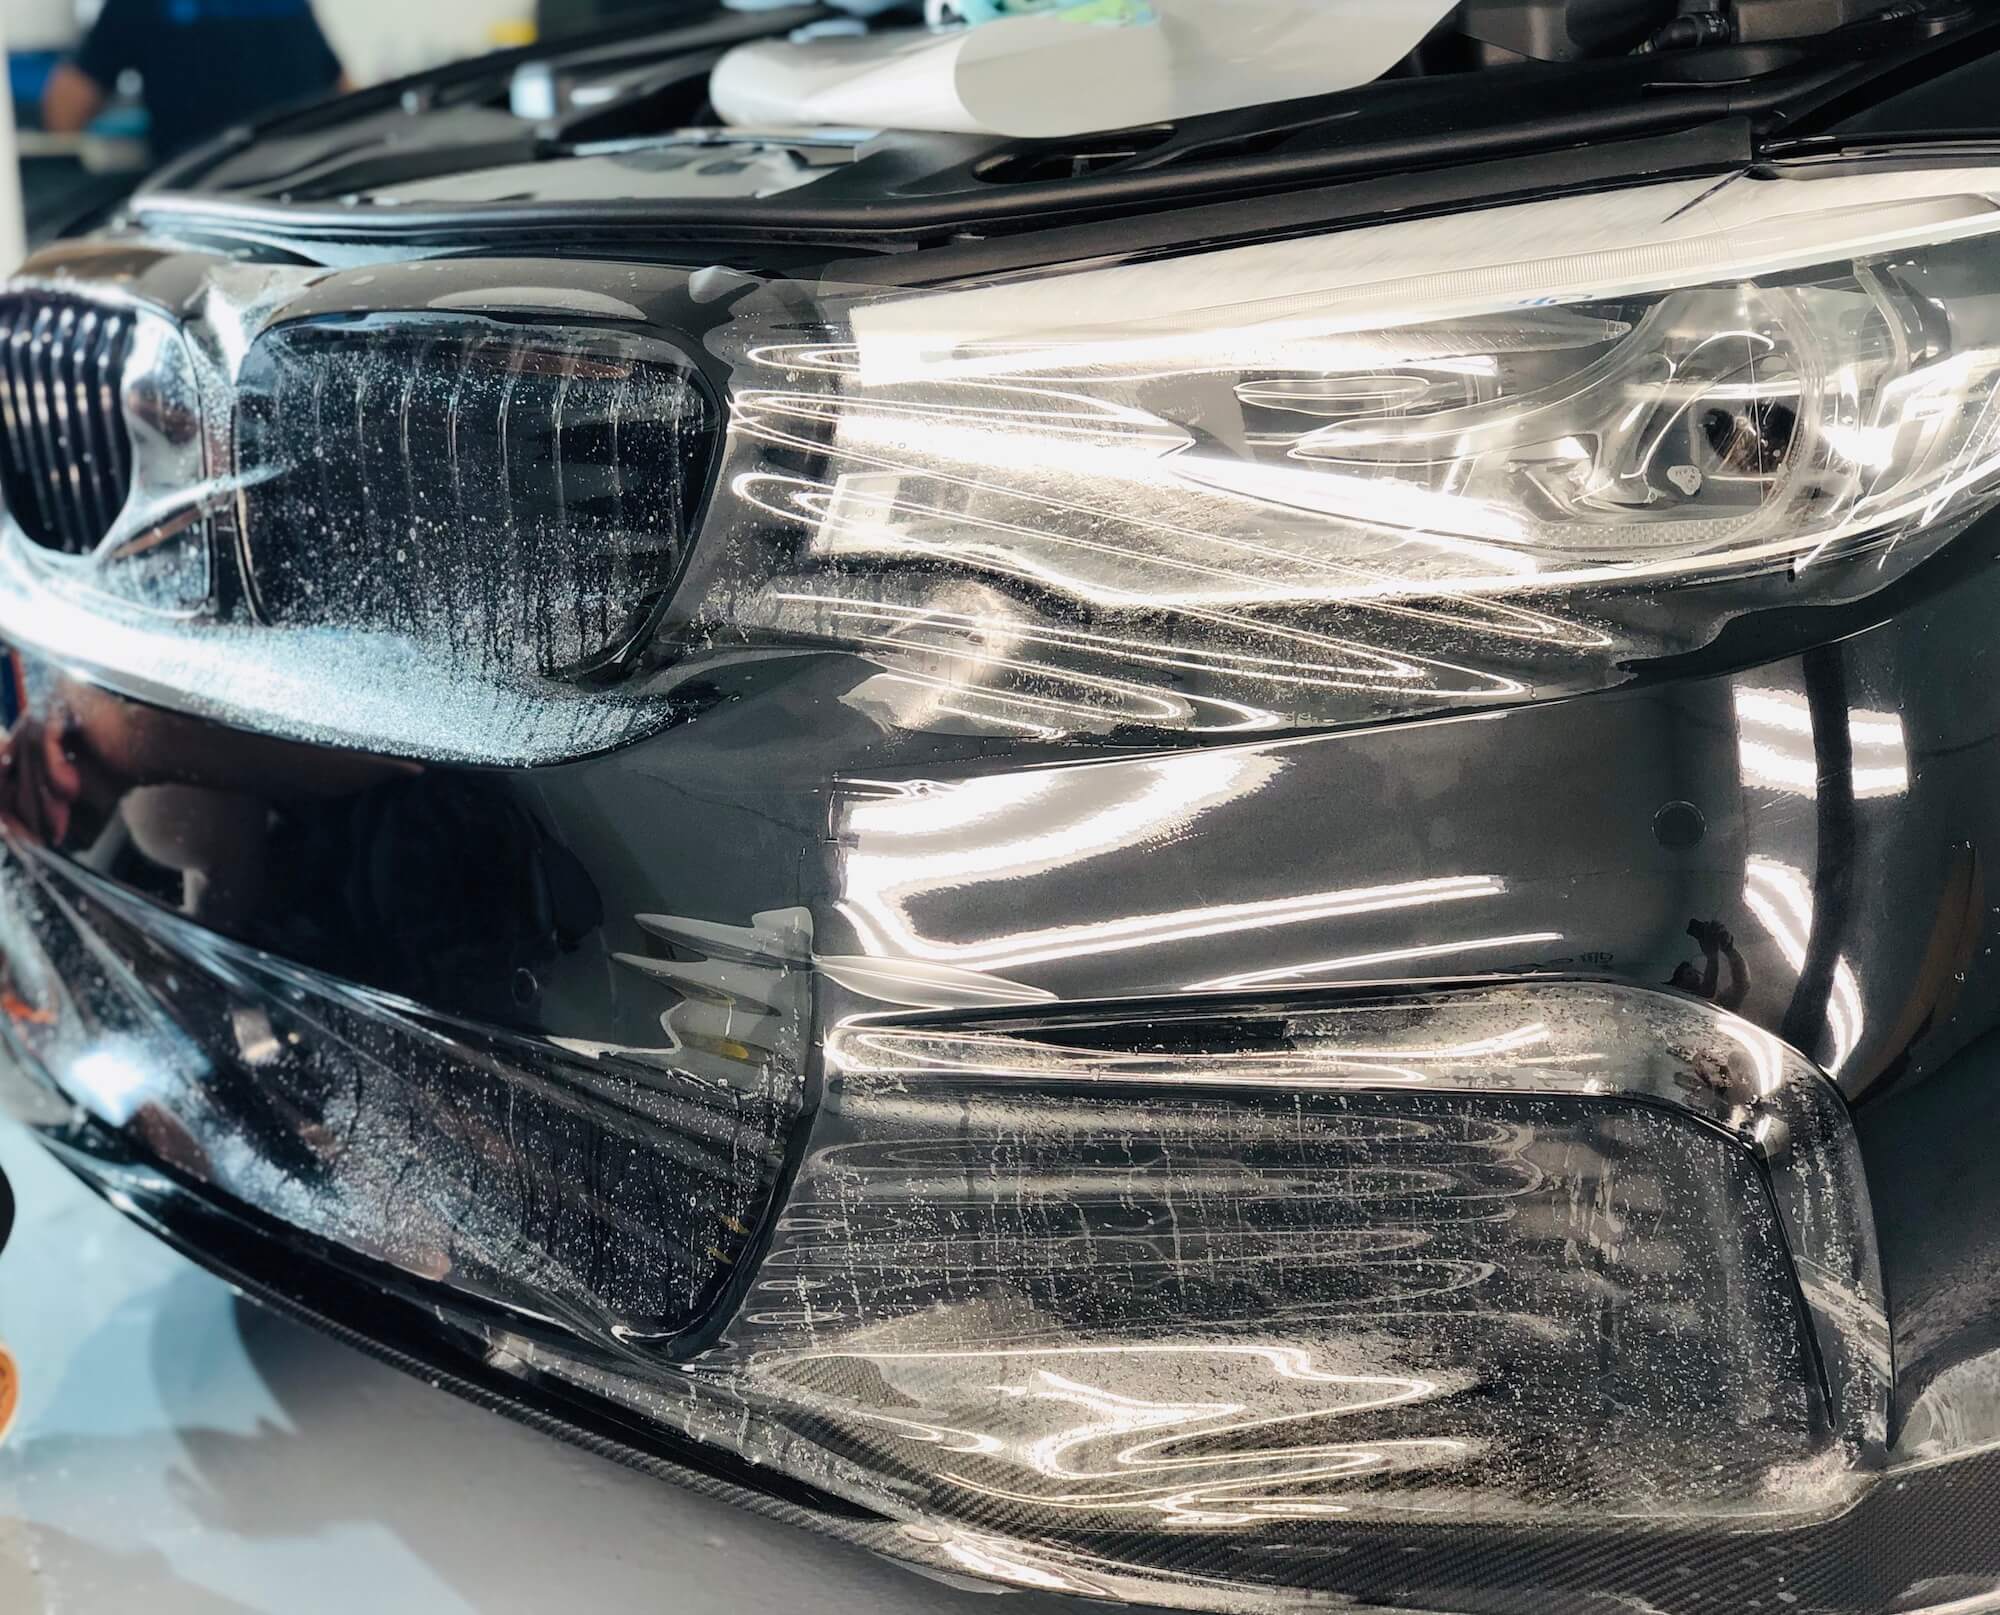 Clear Bra or Ceramic Coating: Which Is Best for Your Vehicle?